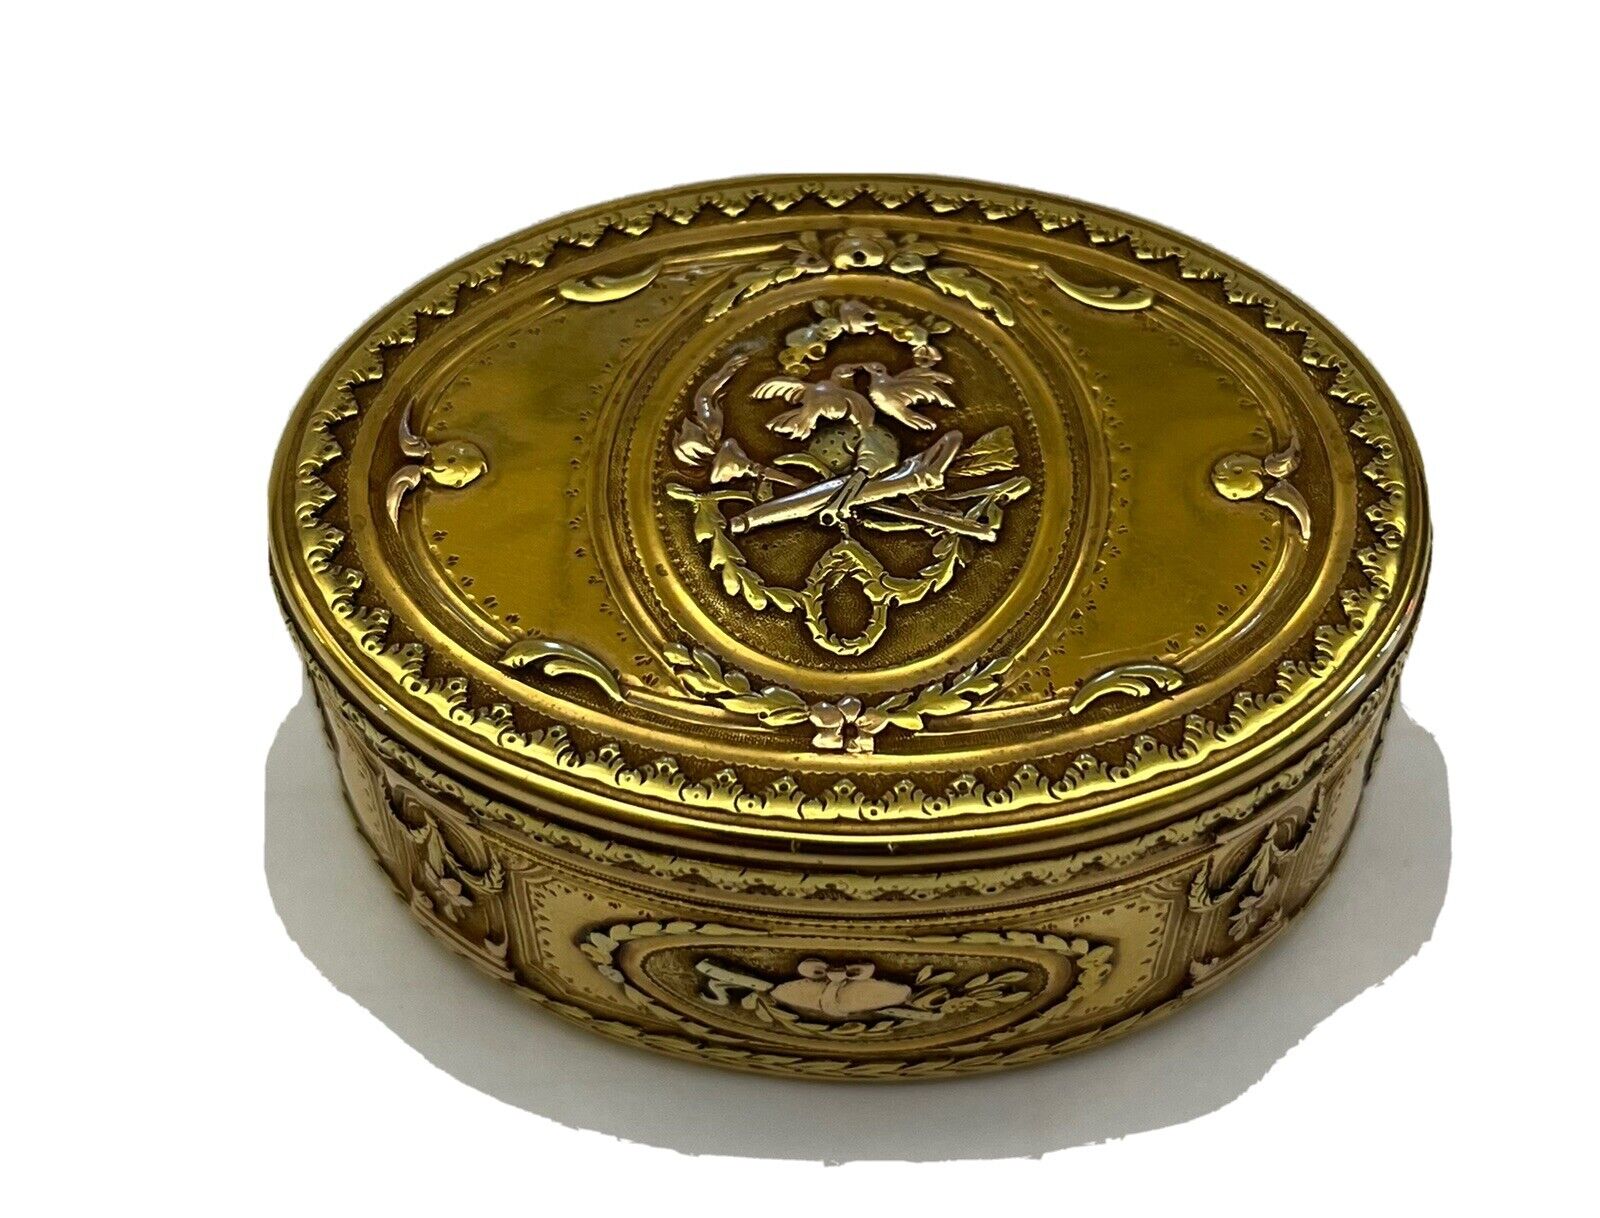 A LOUIS XVI 1775 DATED VARICOLOR 18K GOLD FRENCH SNUFF BOX 